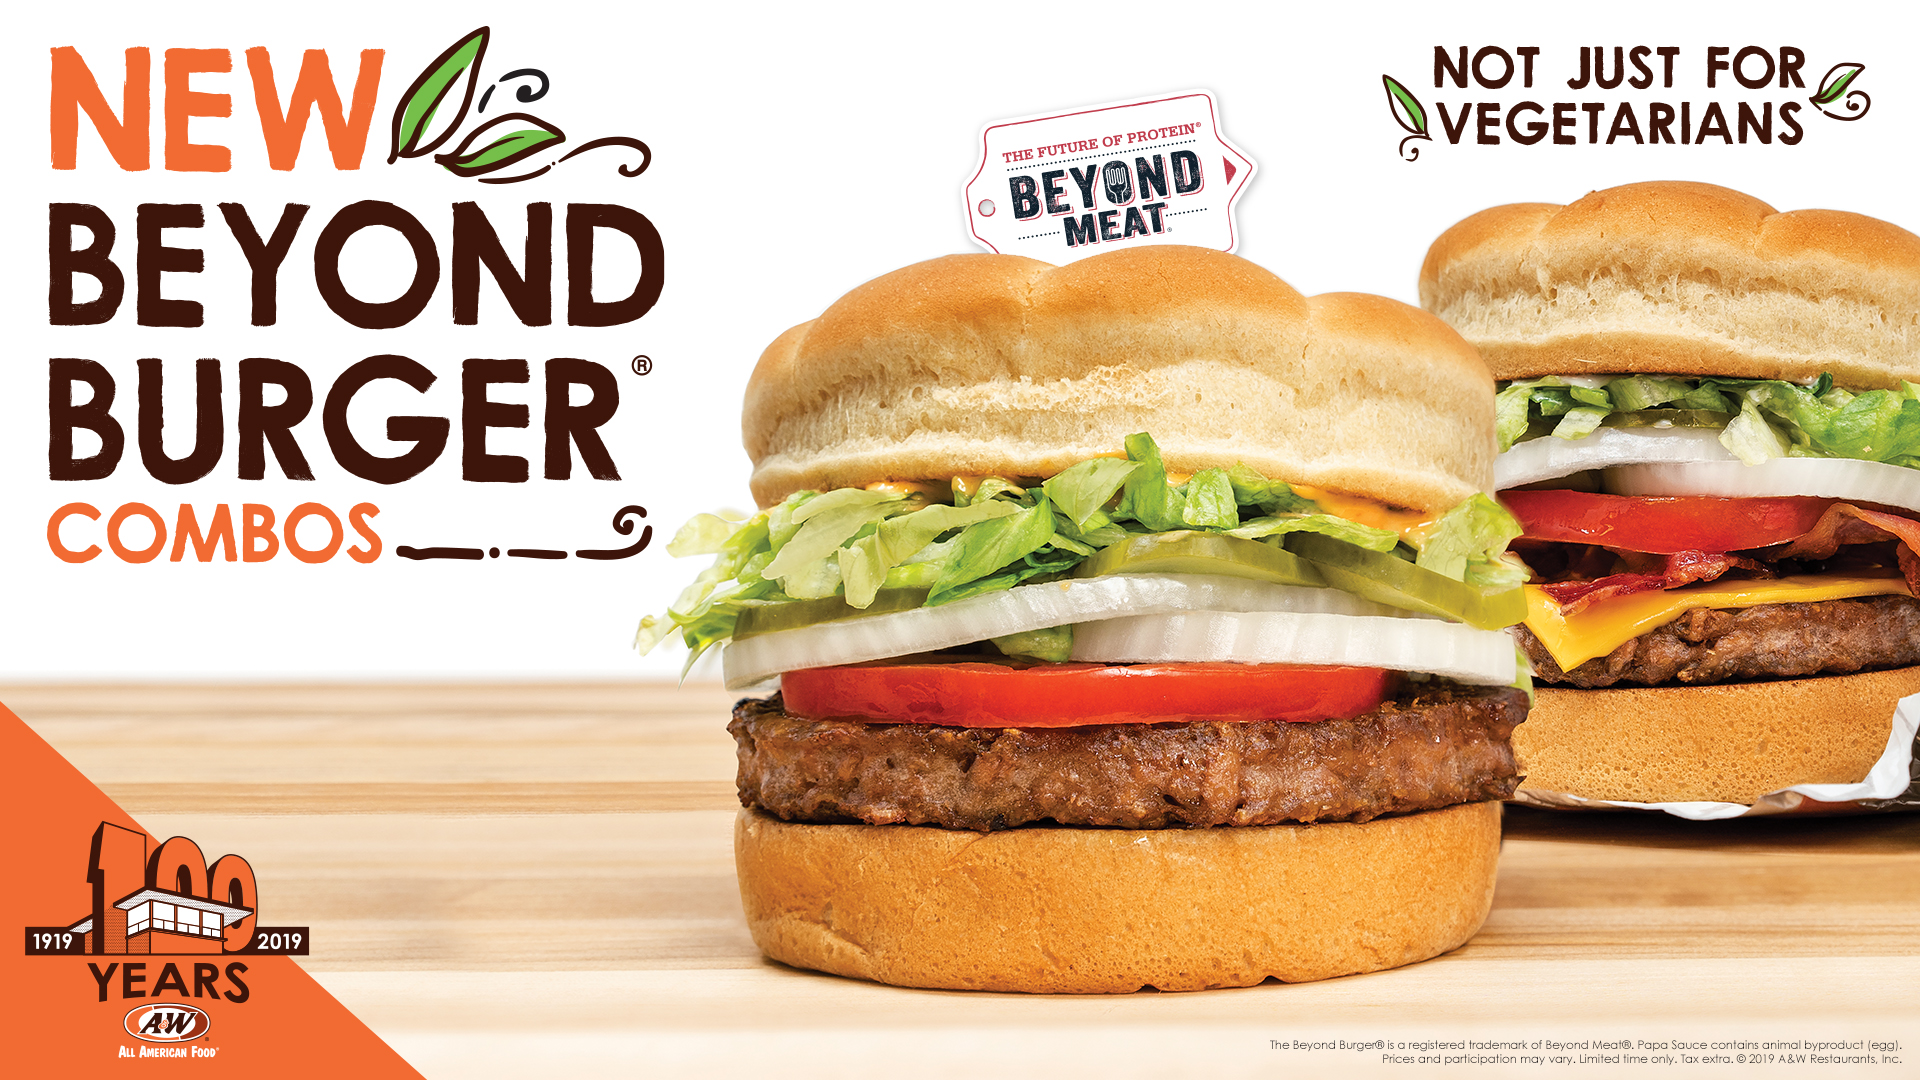 Text on top left reads "New Beyond Burger Combos". Two Beyond Burgers on the right side, the farthest right Beyond Burger has bacon. Text above burgers reads "Not just for vegetarians"